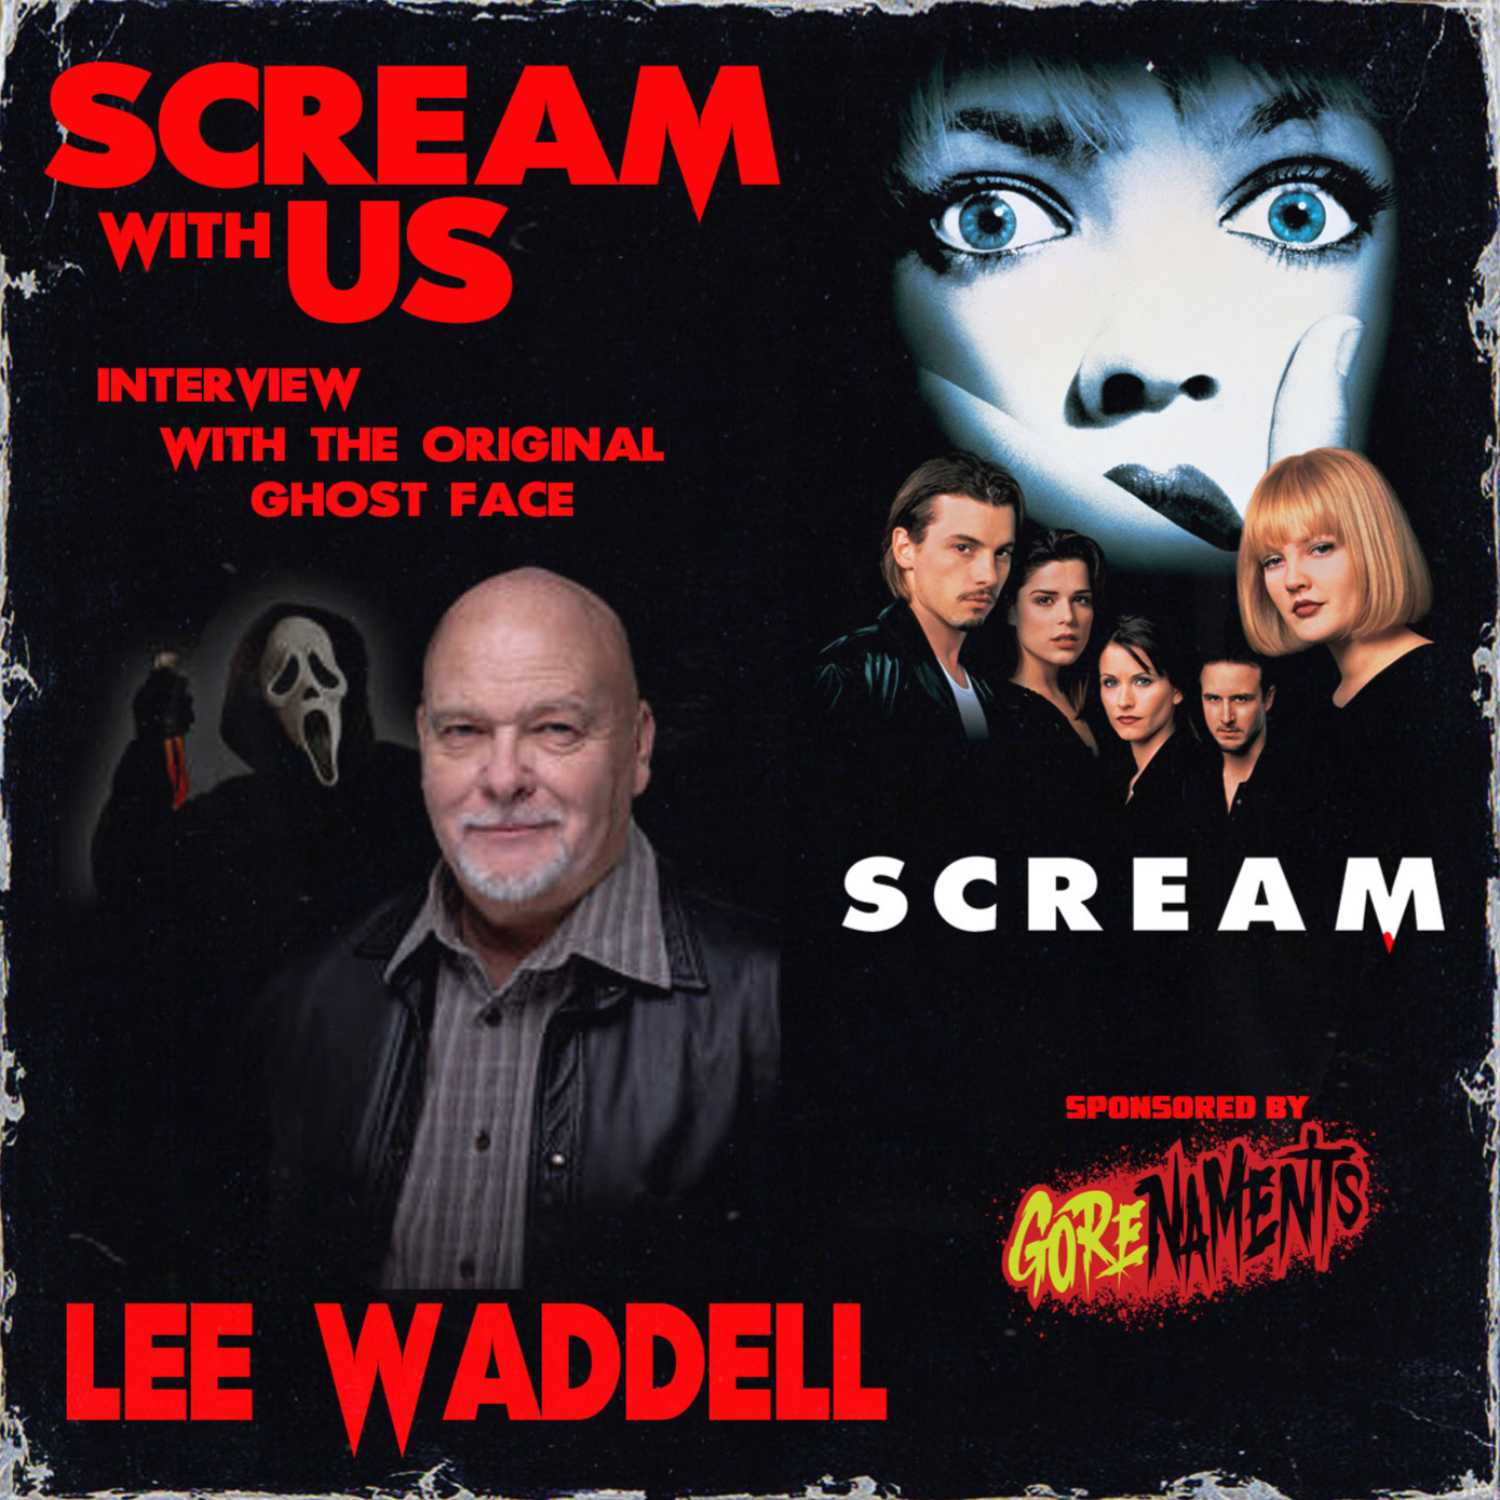 SCREAM with us! Interview with Lee Waddell